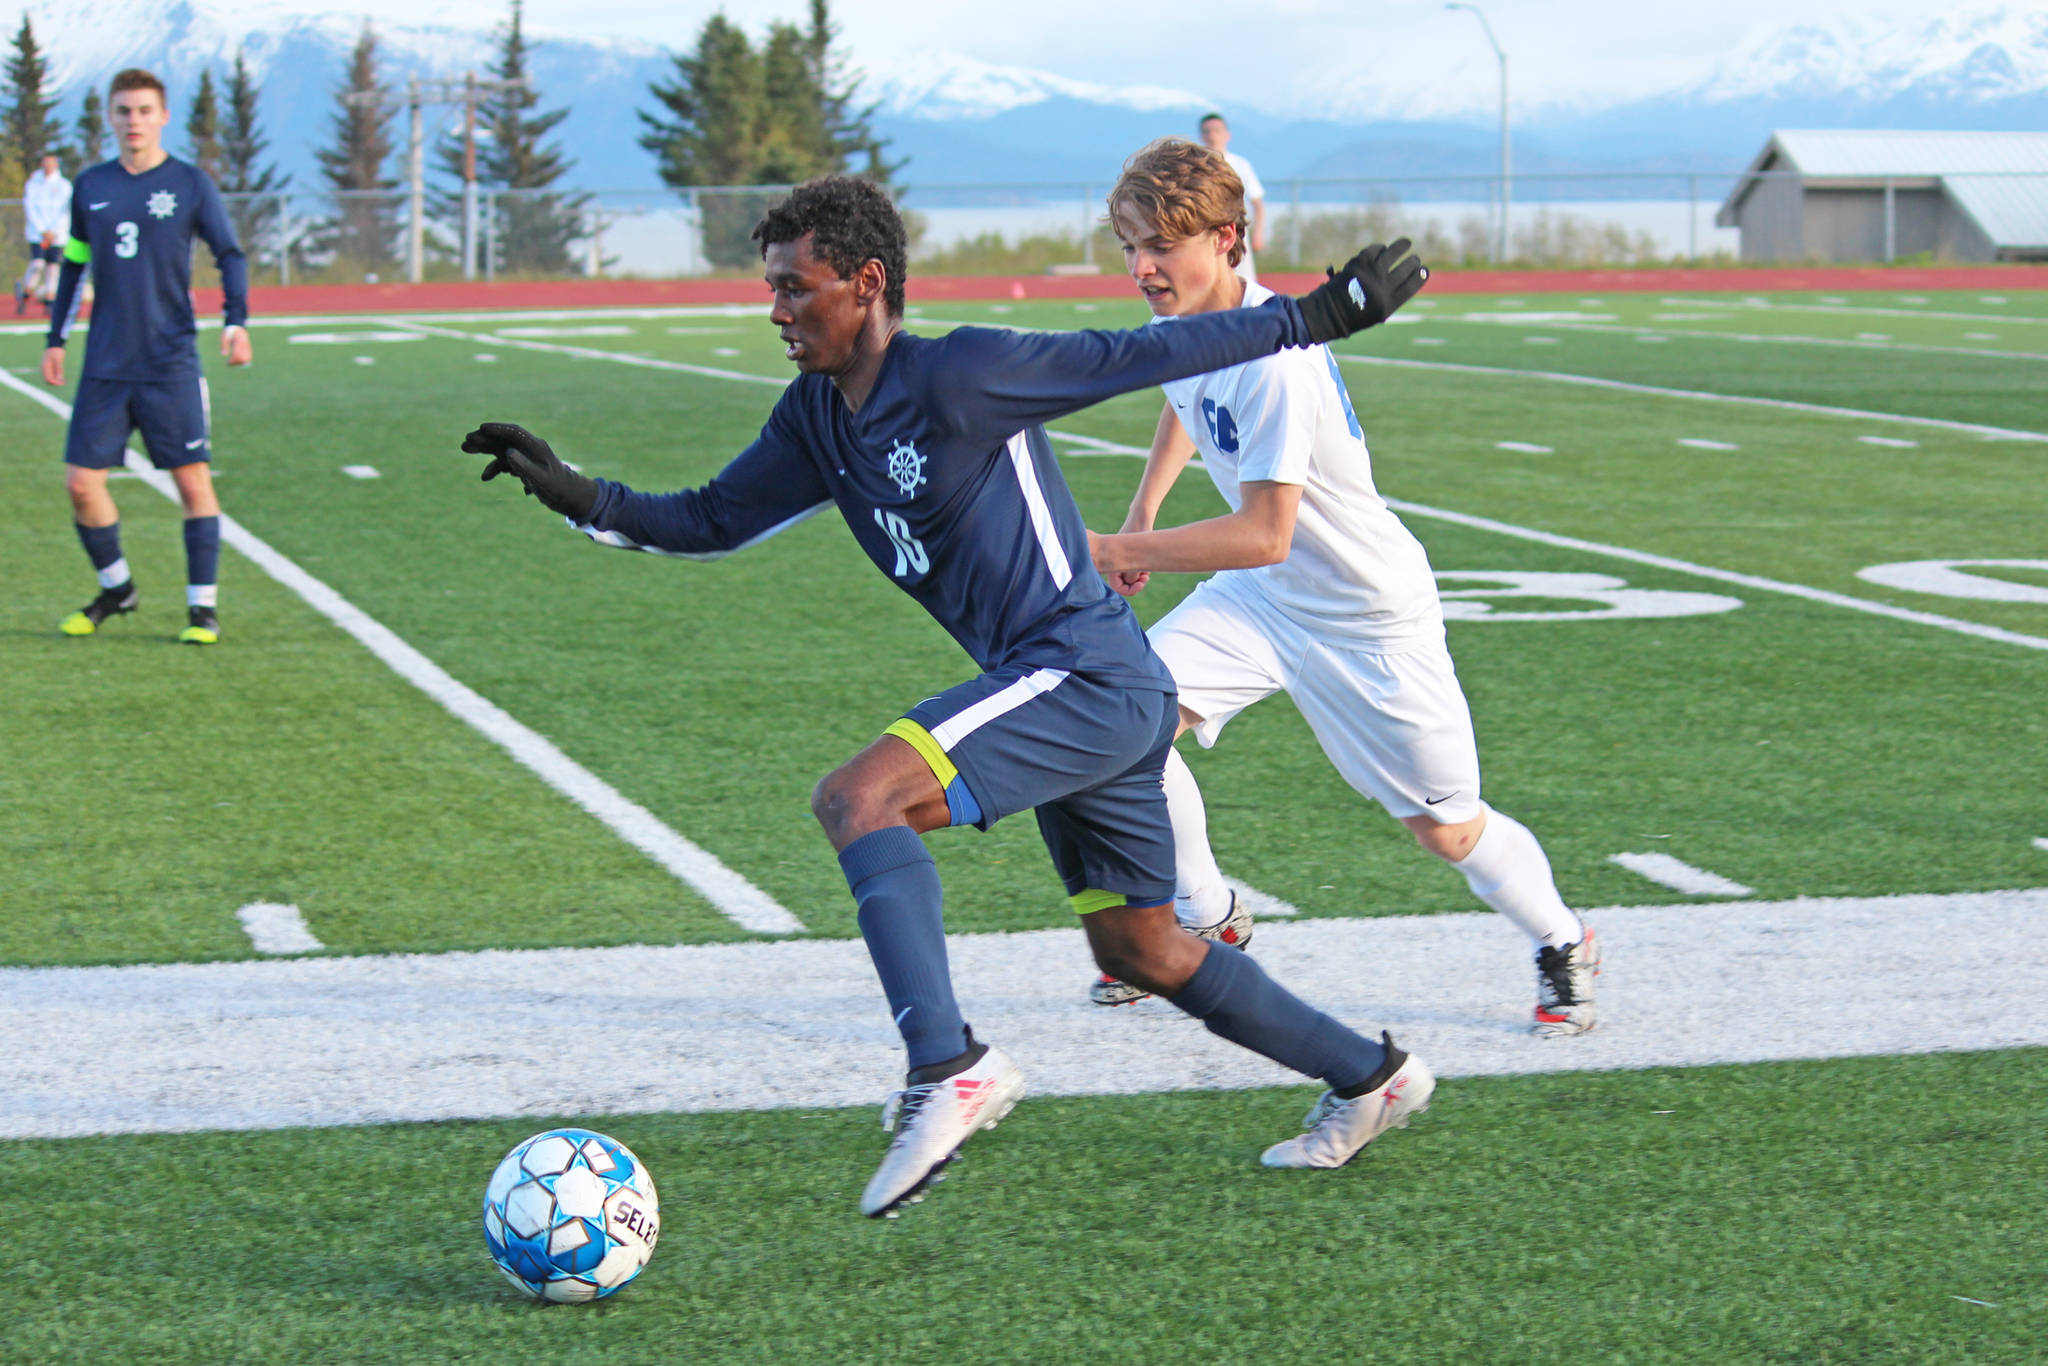 Homer’s Eyoab Knapp takes the ball up the field under pressure from Soldotna’s Quin Cox during the semi-final game of the Peninsula Conference Soccer Tournament on Friday, May 17, 2019 at Homer High School in Homer, Alaska. (Photo by Megan Pacer/Homer News)